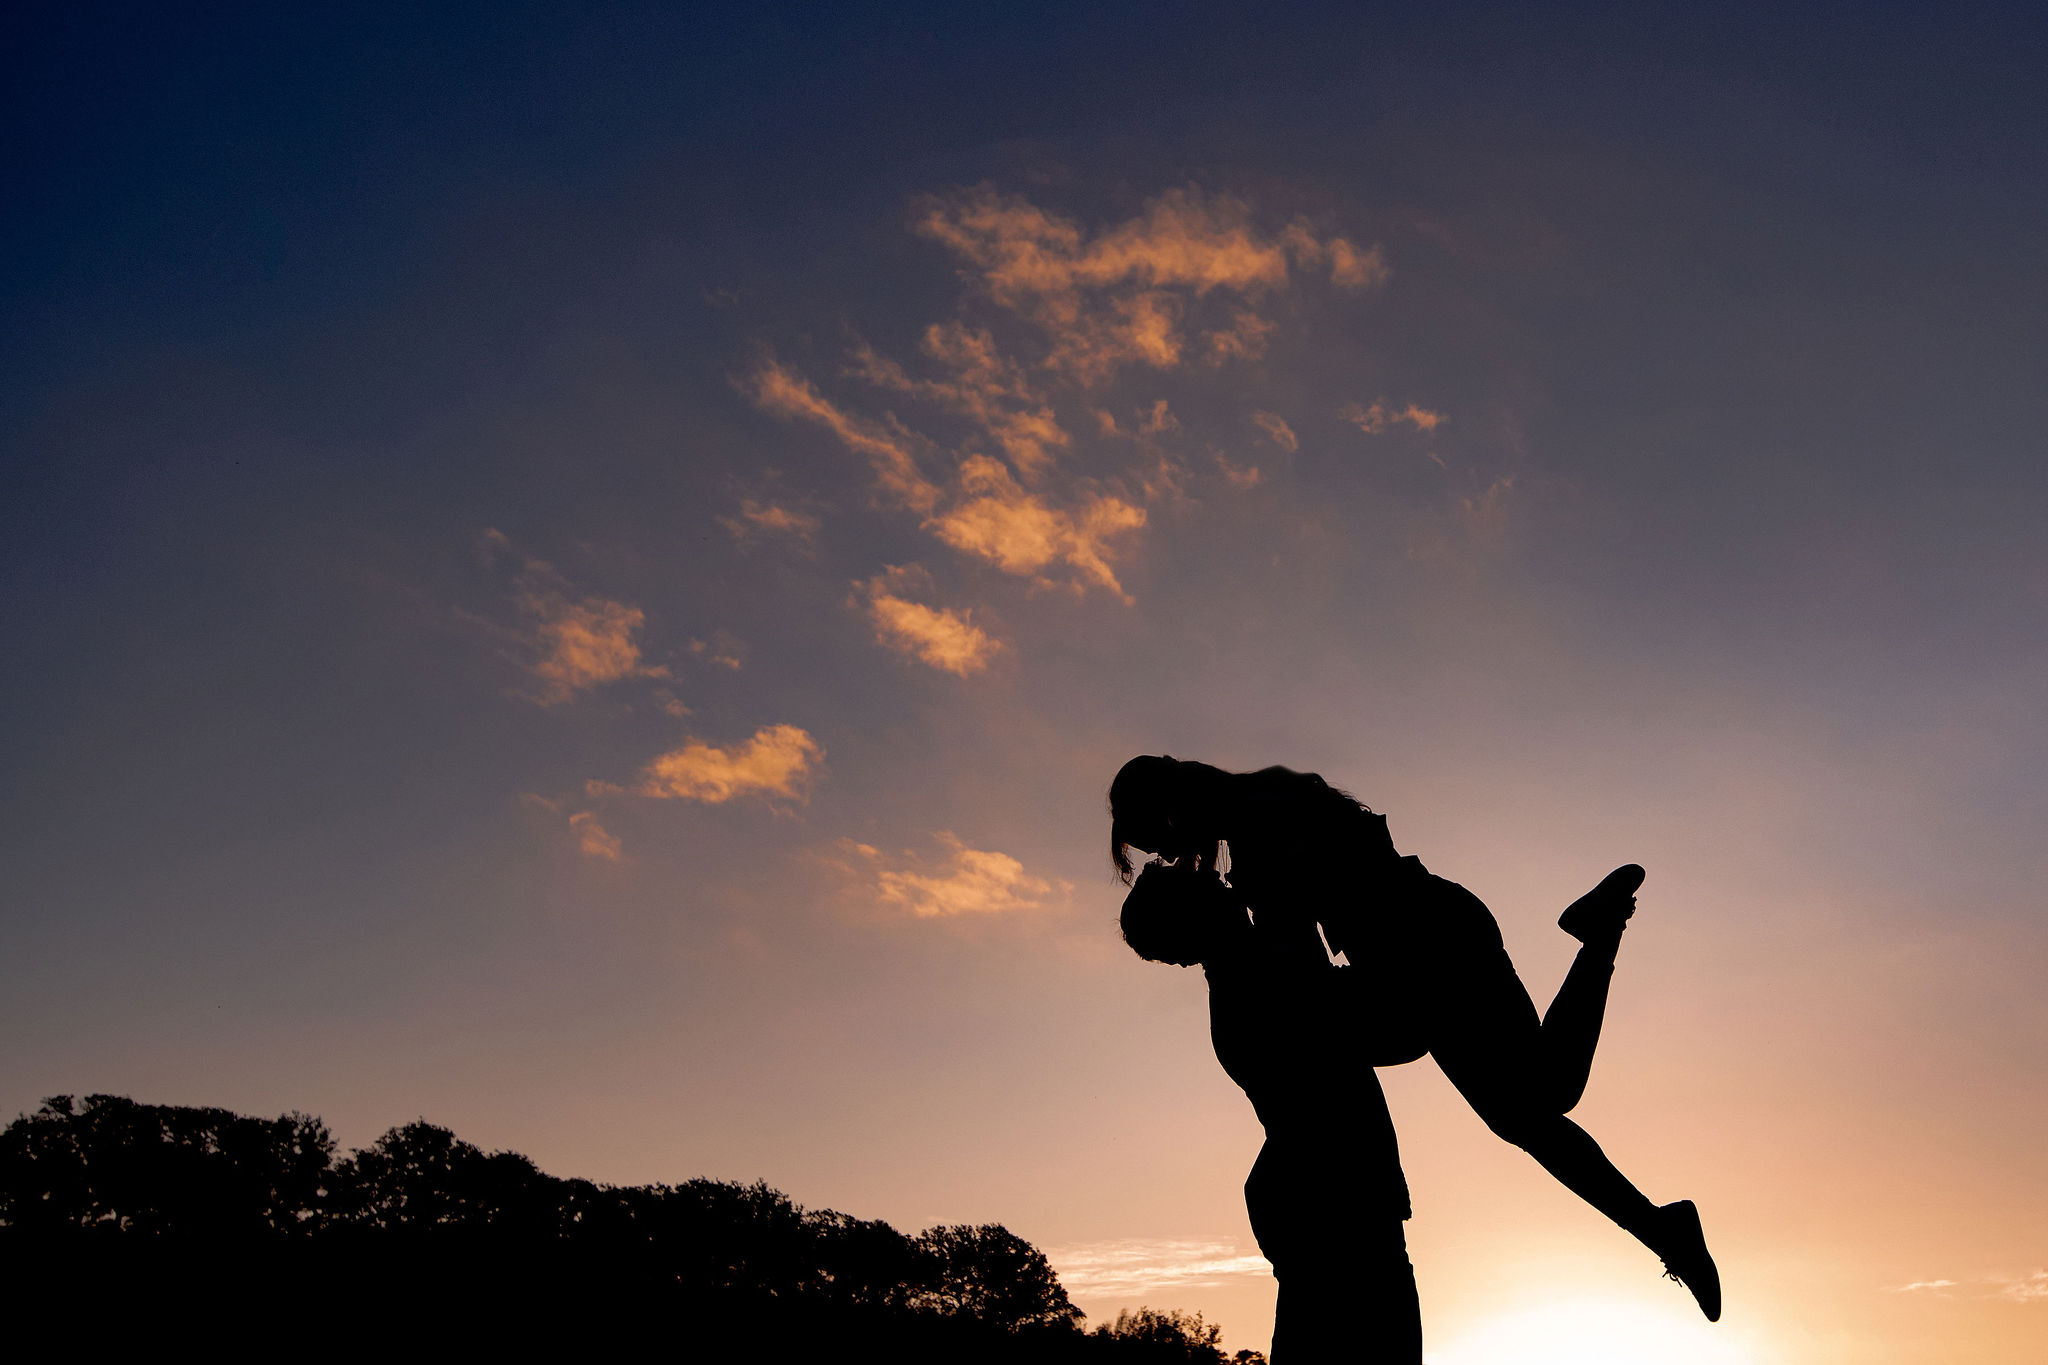 Here's a list of surprise proposal ideas. Photo has a couple against a sunset